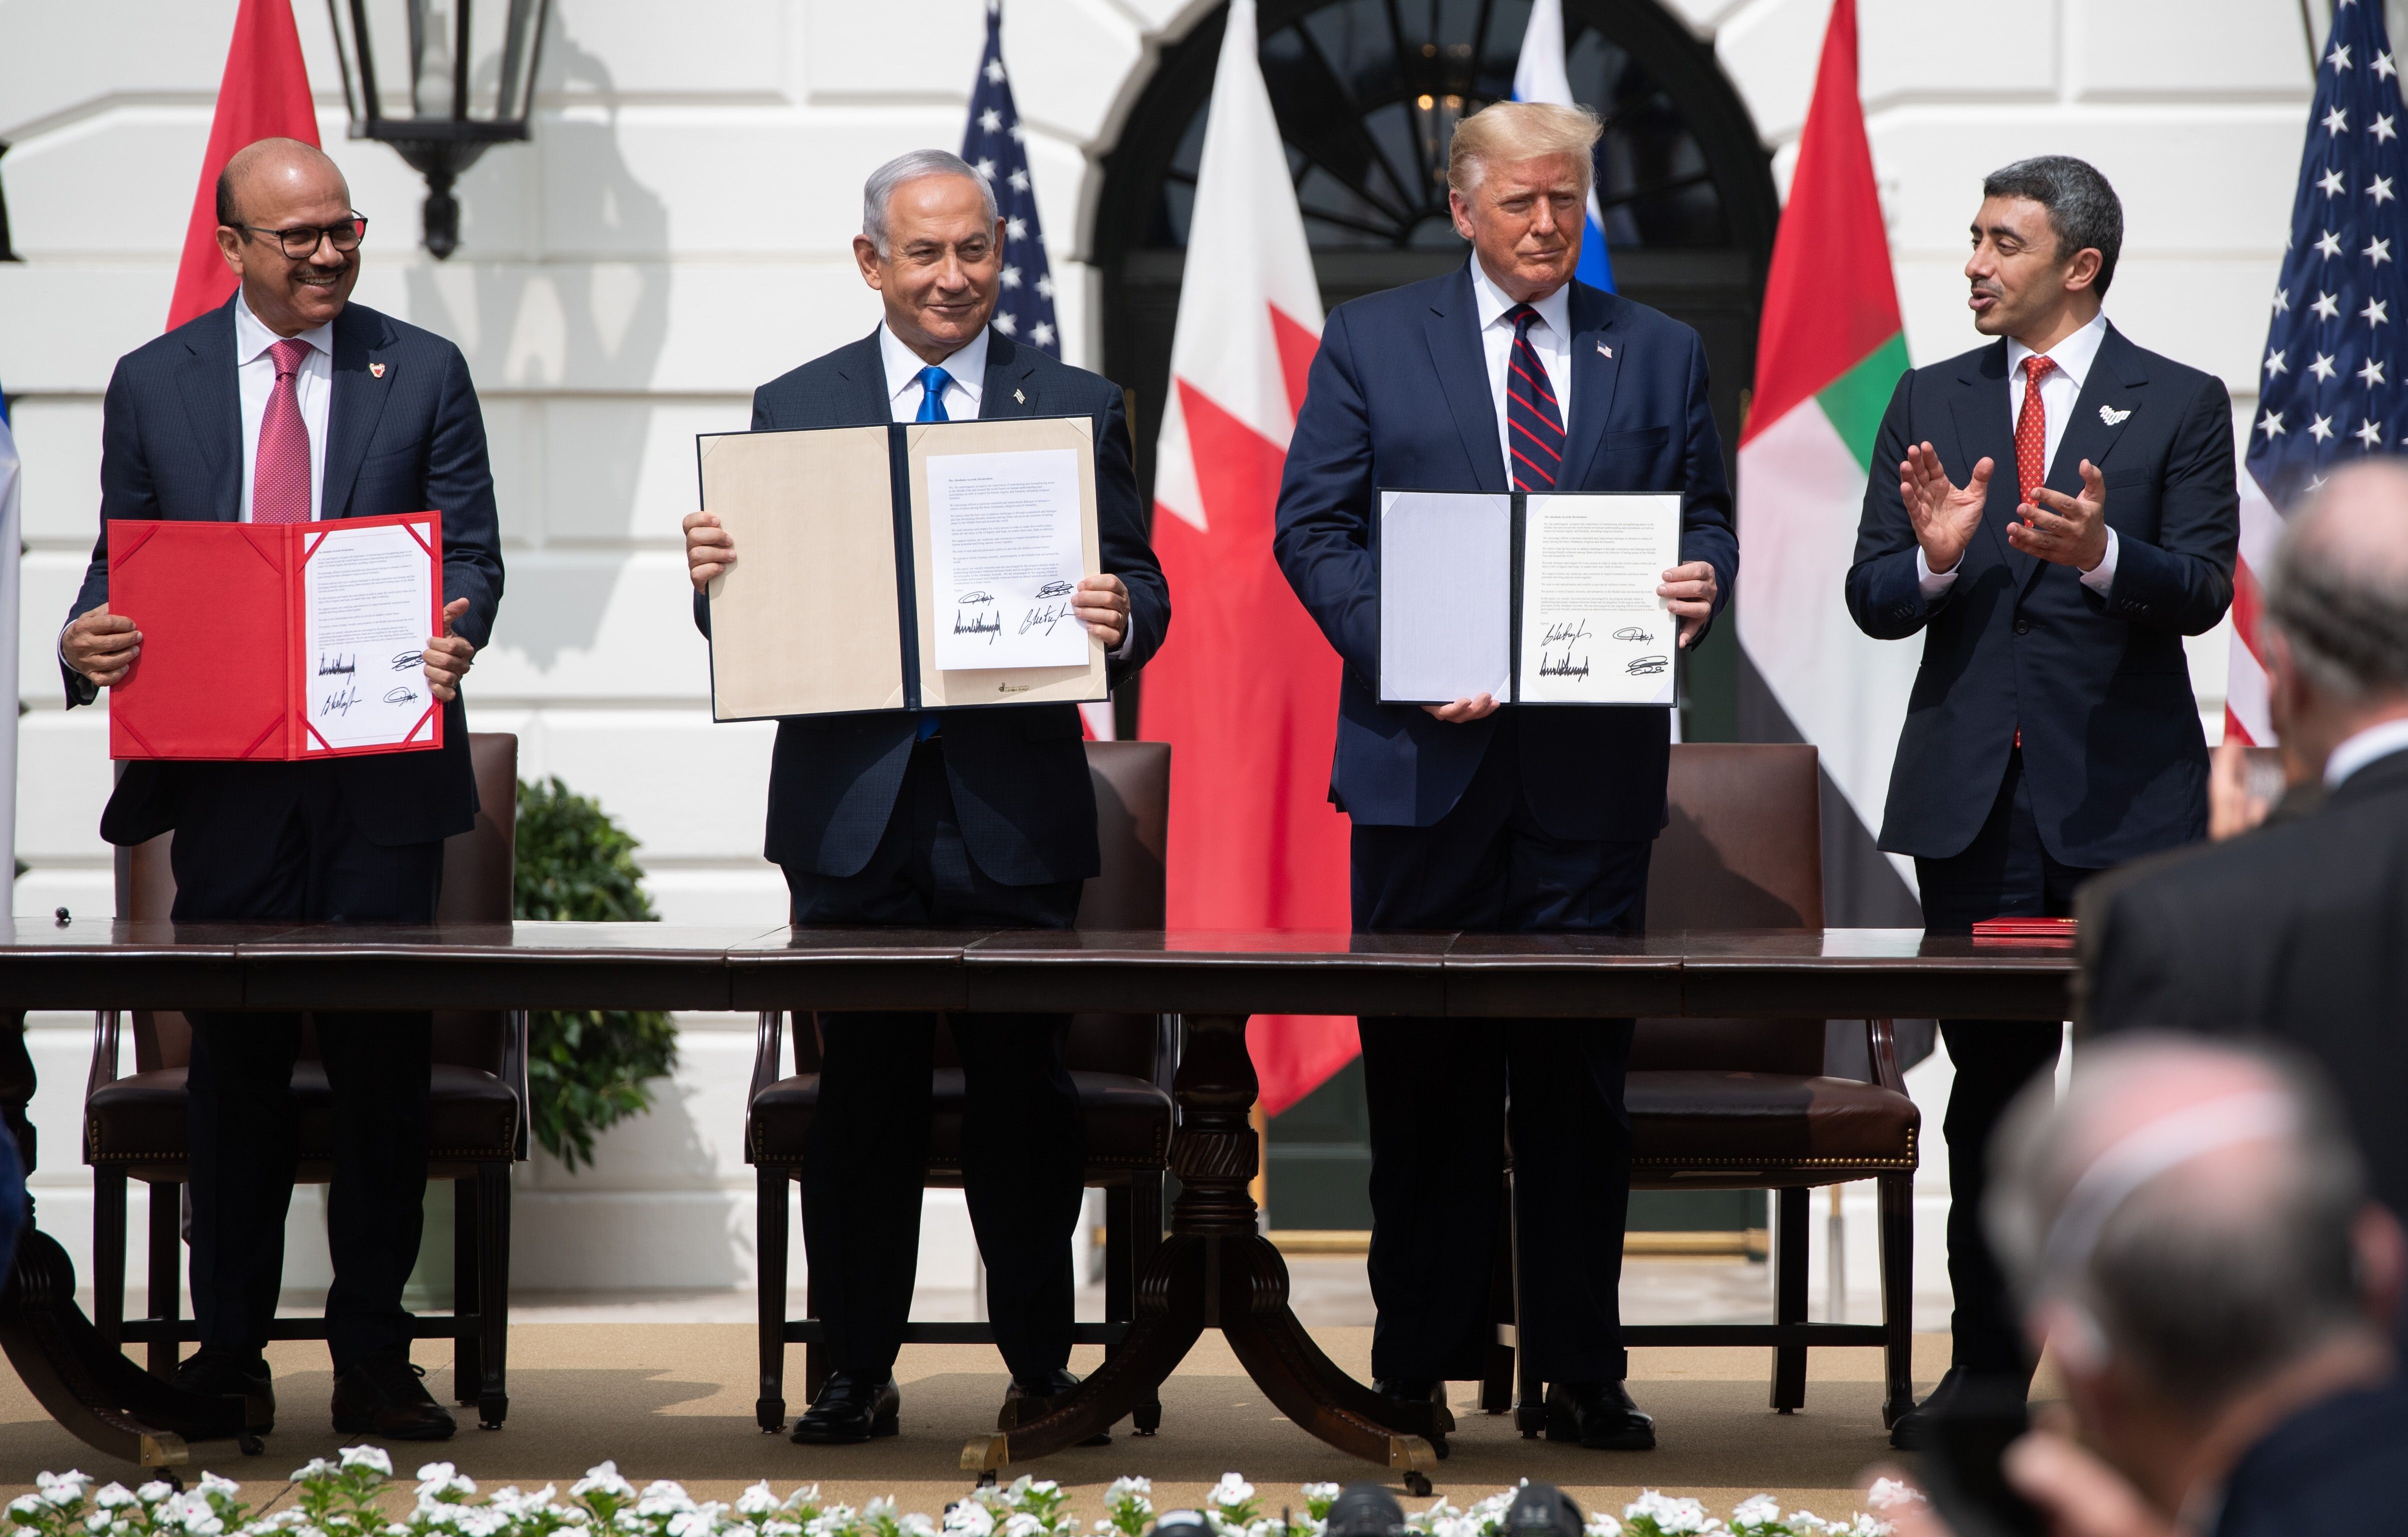 (Left to right) Bahrain’s Foreign Minister Abdullatif al-Zayani, Israeli Prime Minister Benjamin Netanyahu, US President Donald Trump and UAE Foreign Minister Abdullah bin Zayed Al-Nahyan at the signing of the Abraham Accords at the White House on September 15. Photo: AFP